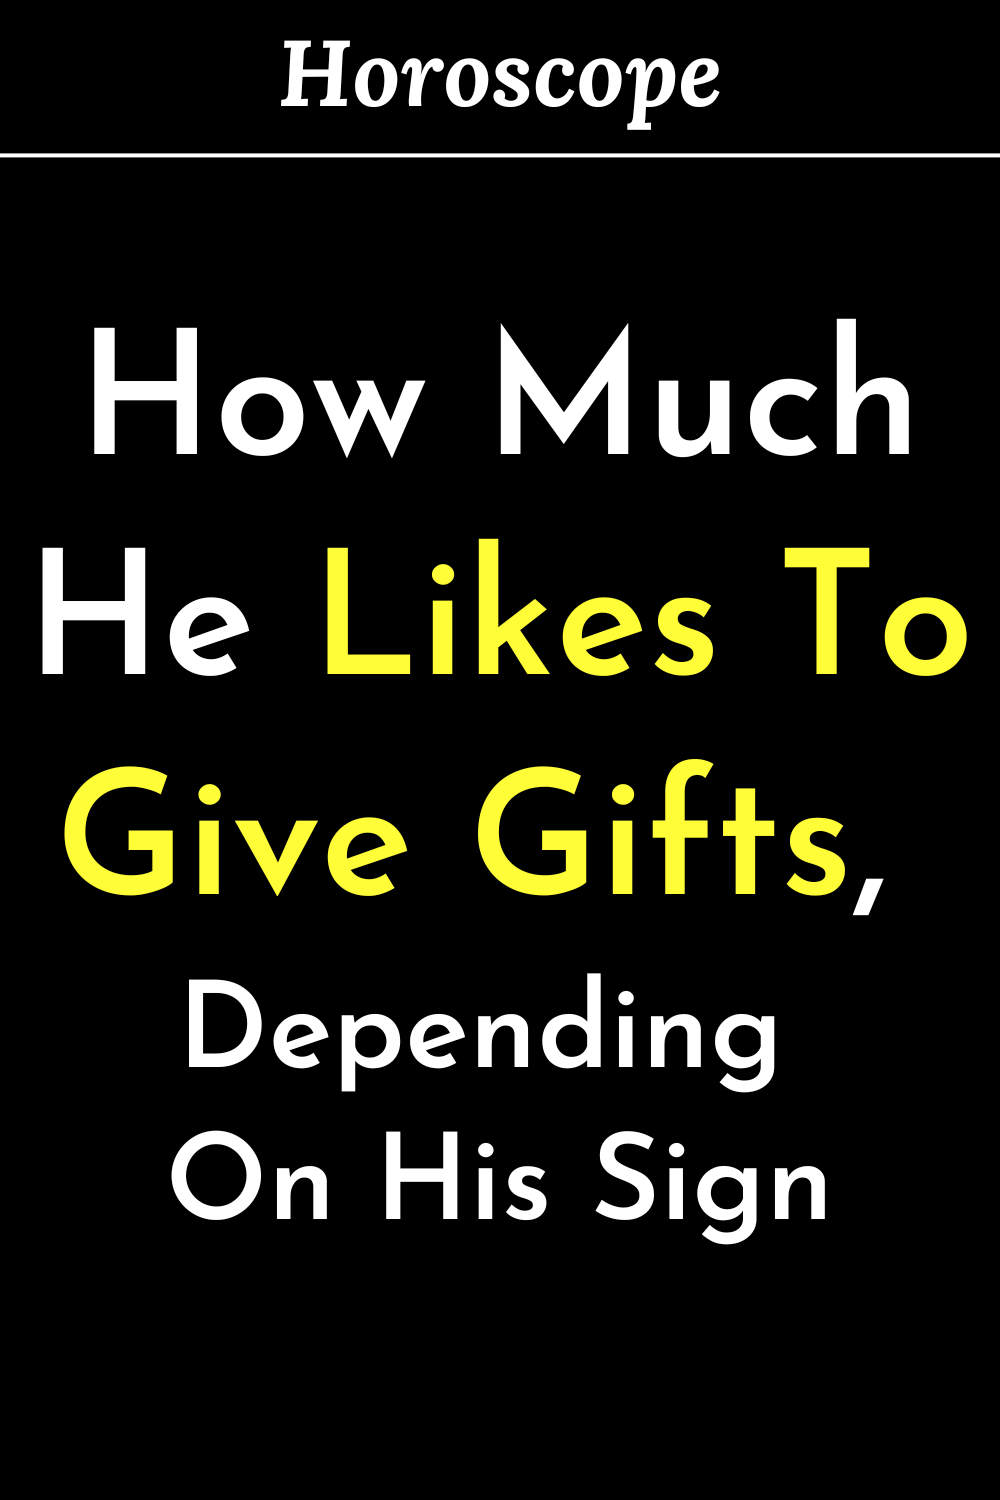 How Much He Likes To Give Gifts, Depending On His Sign